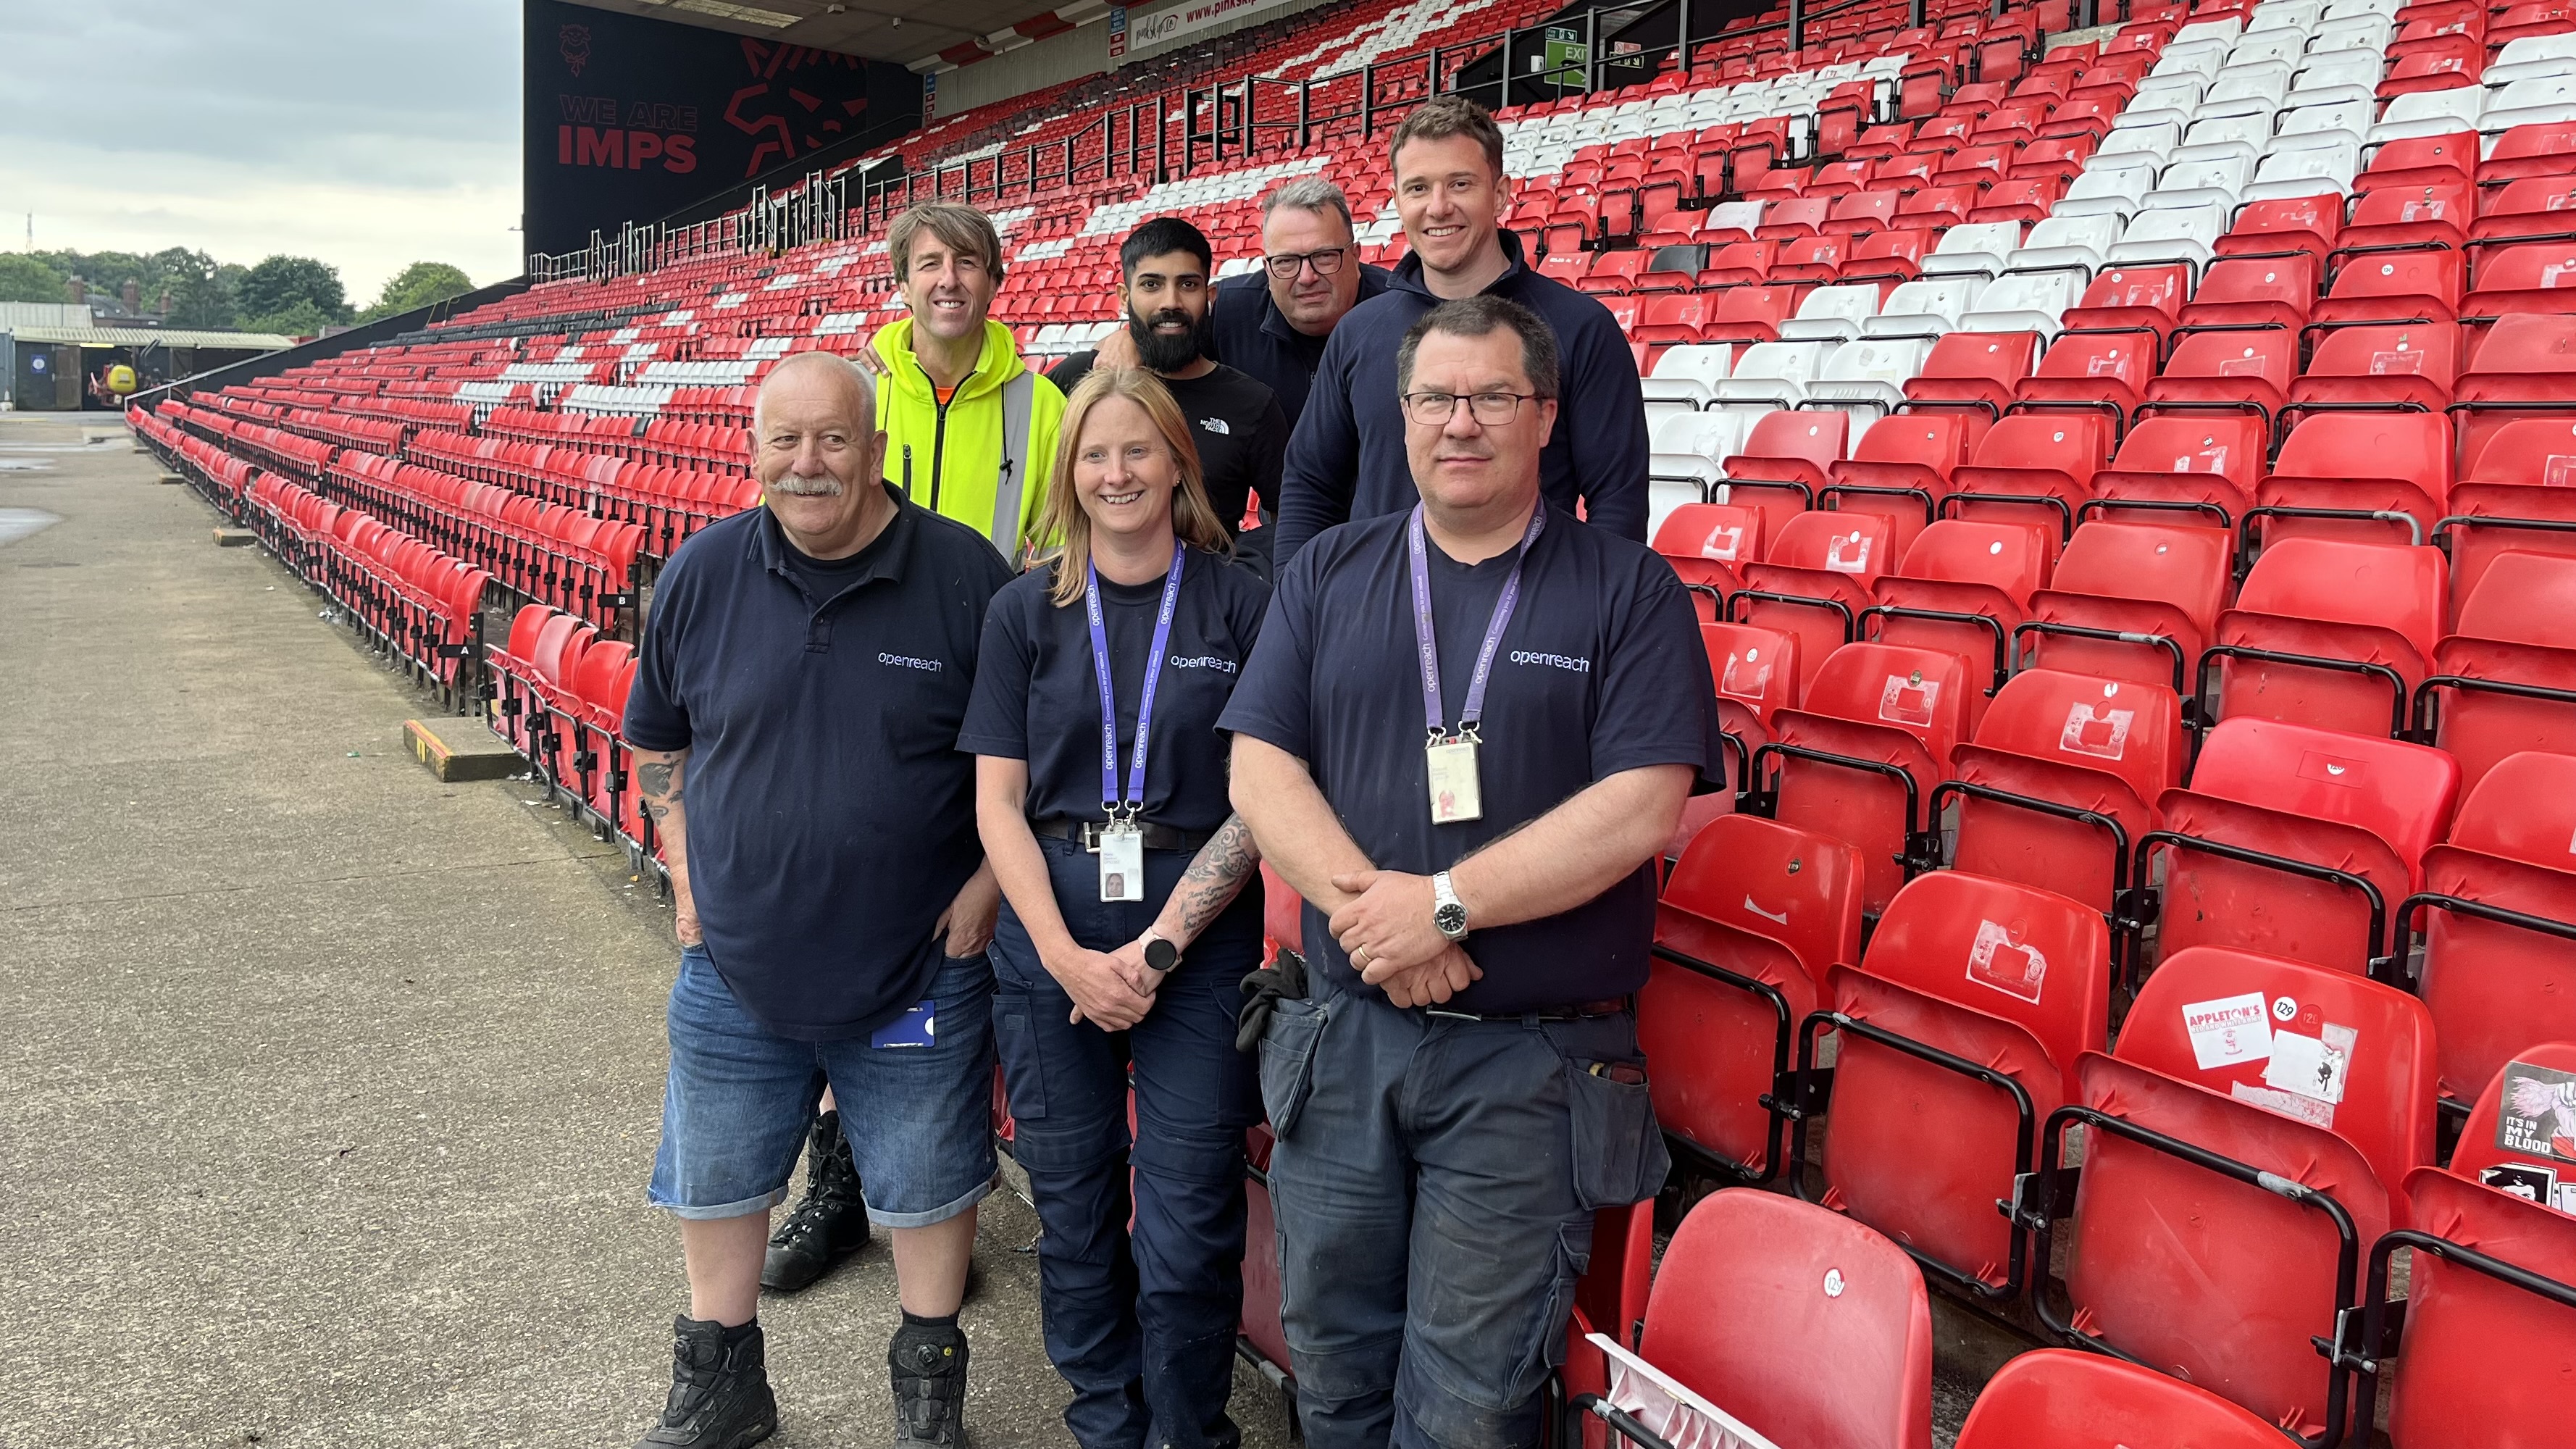 BT Openreach team posing for a photograph at the LNER Stadium.